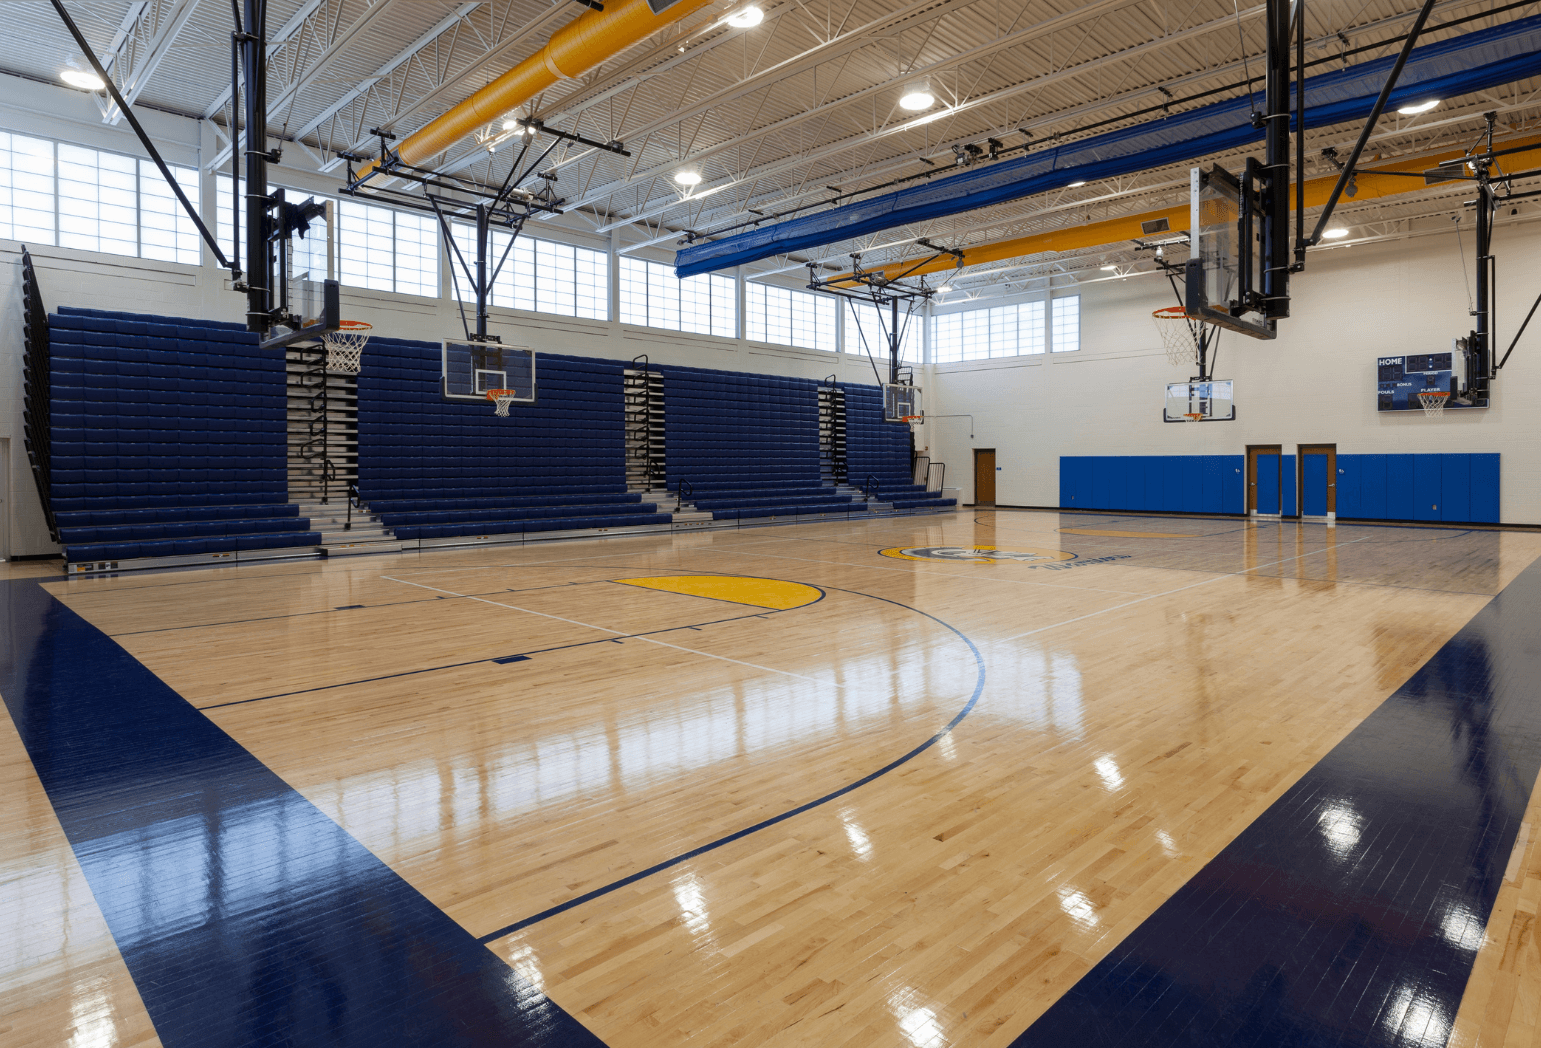 A school gym and basketball court with multiple hoops and seating.